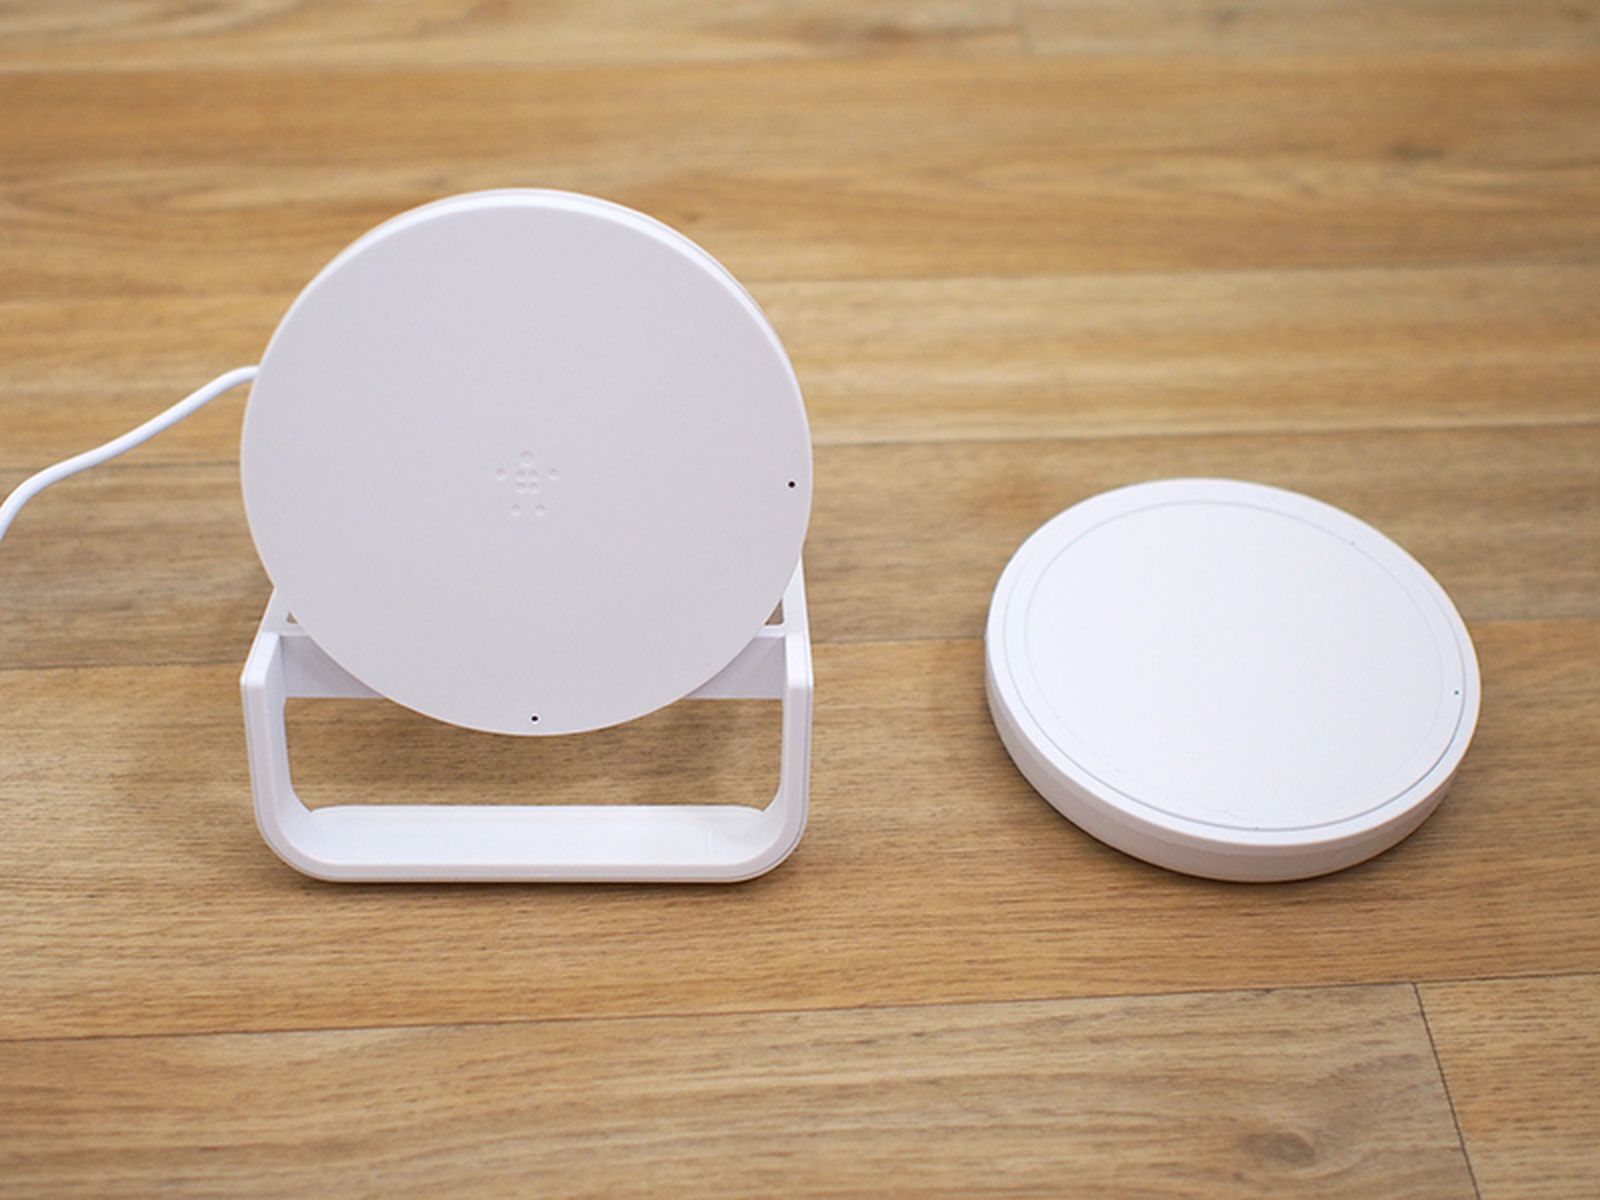 Belkin Boost Up Wireless Charging Pad and Stand Review - MacRumors